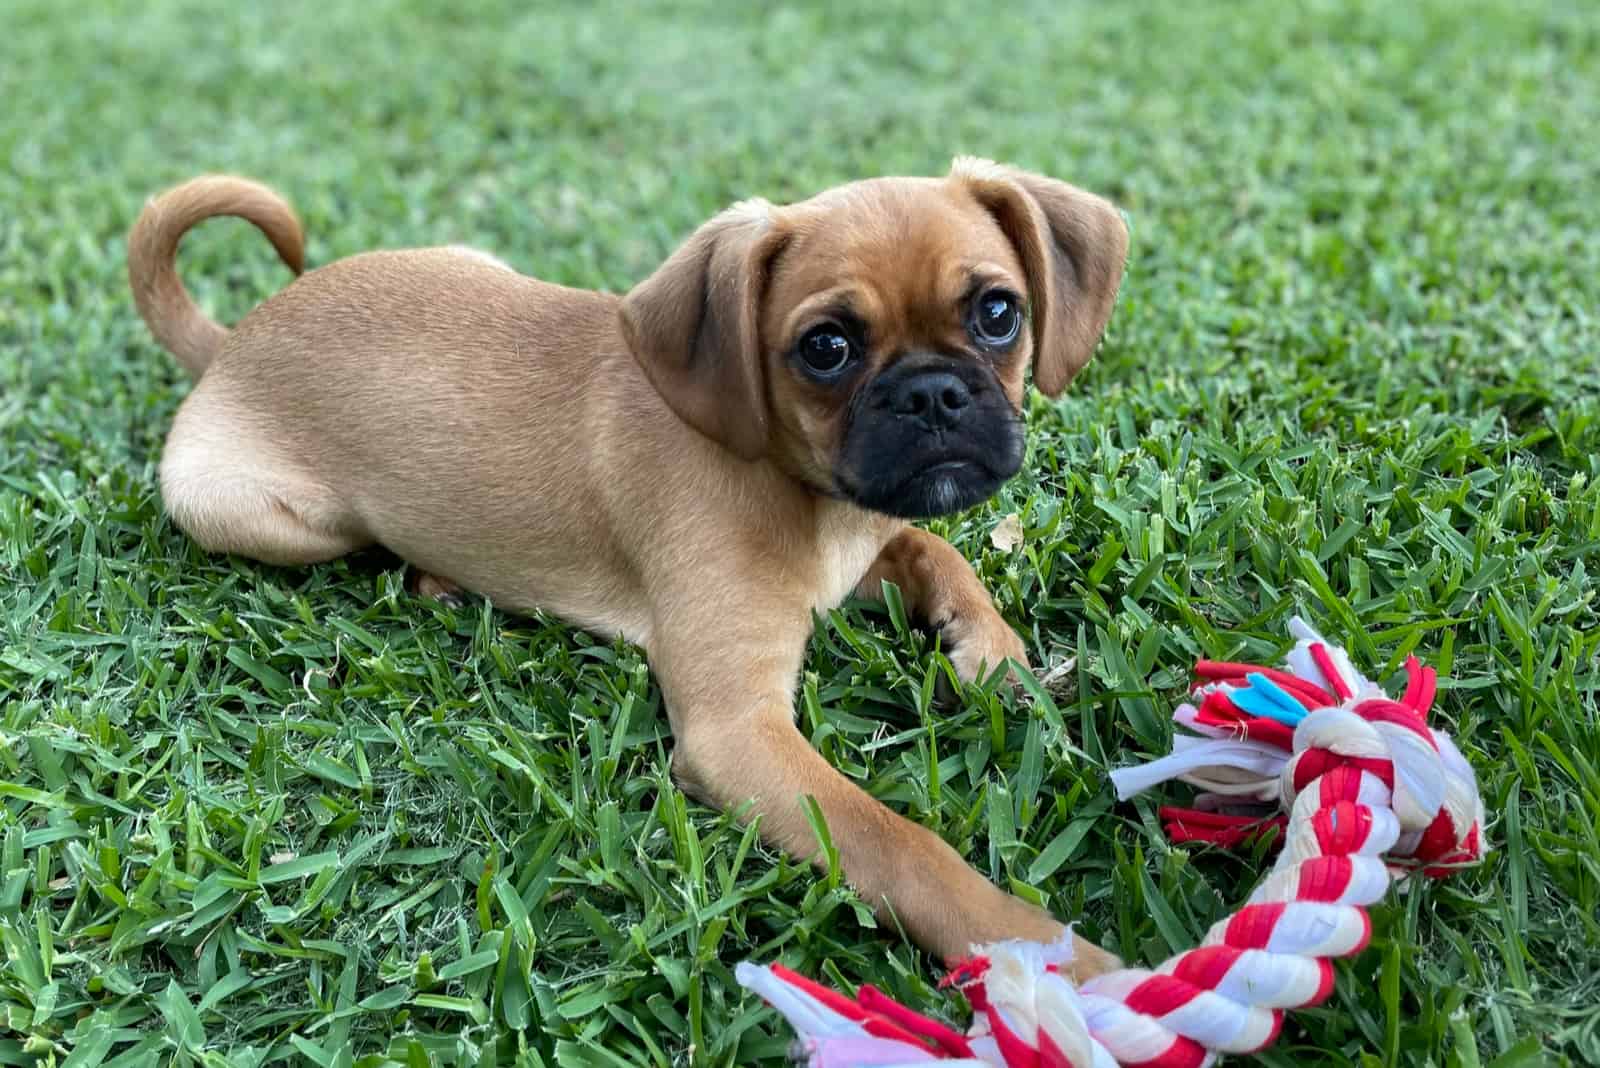 Puppy pugalier playing with dog toy in the backyard on green grass